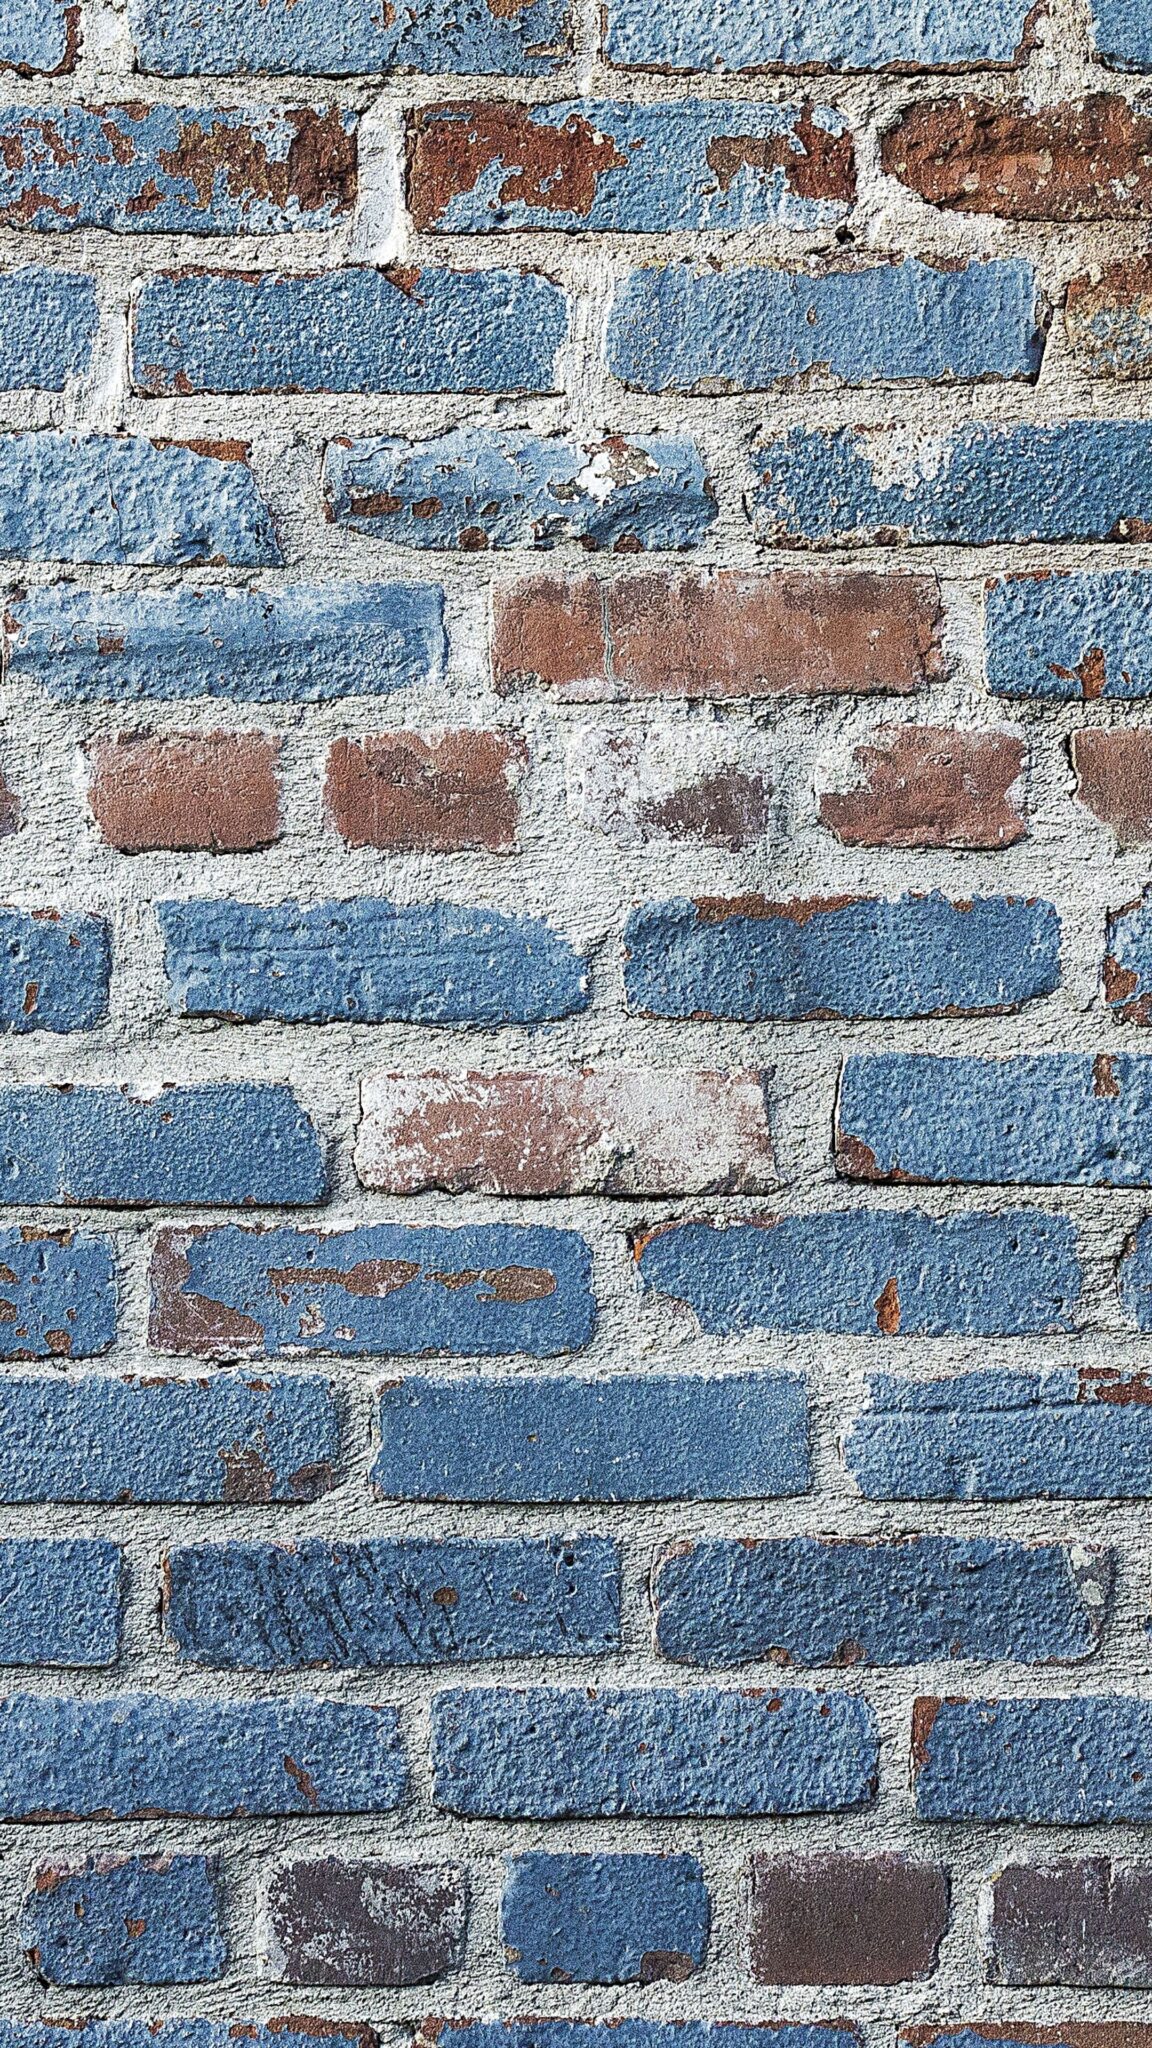 Brick Wall Texture Wallpaper For Mobile Phone